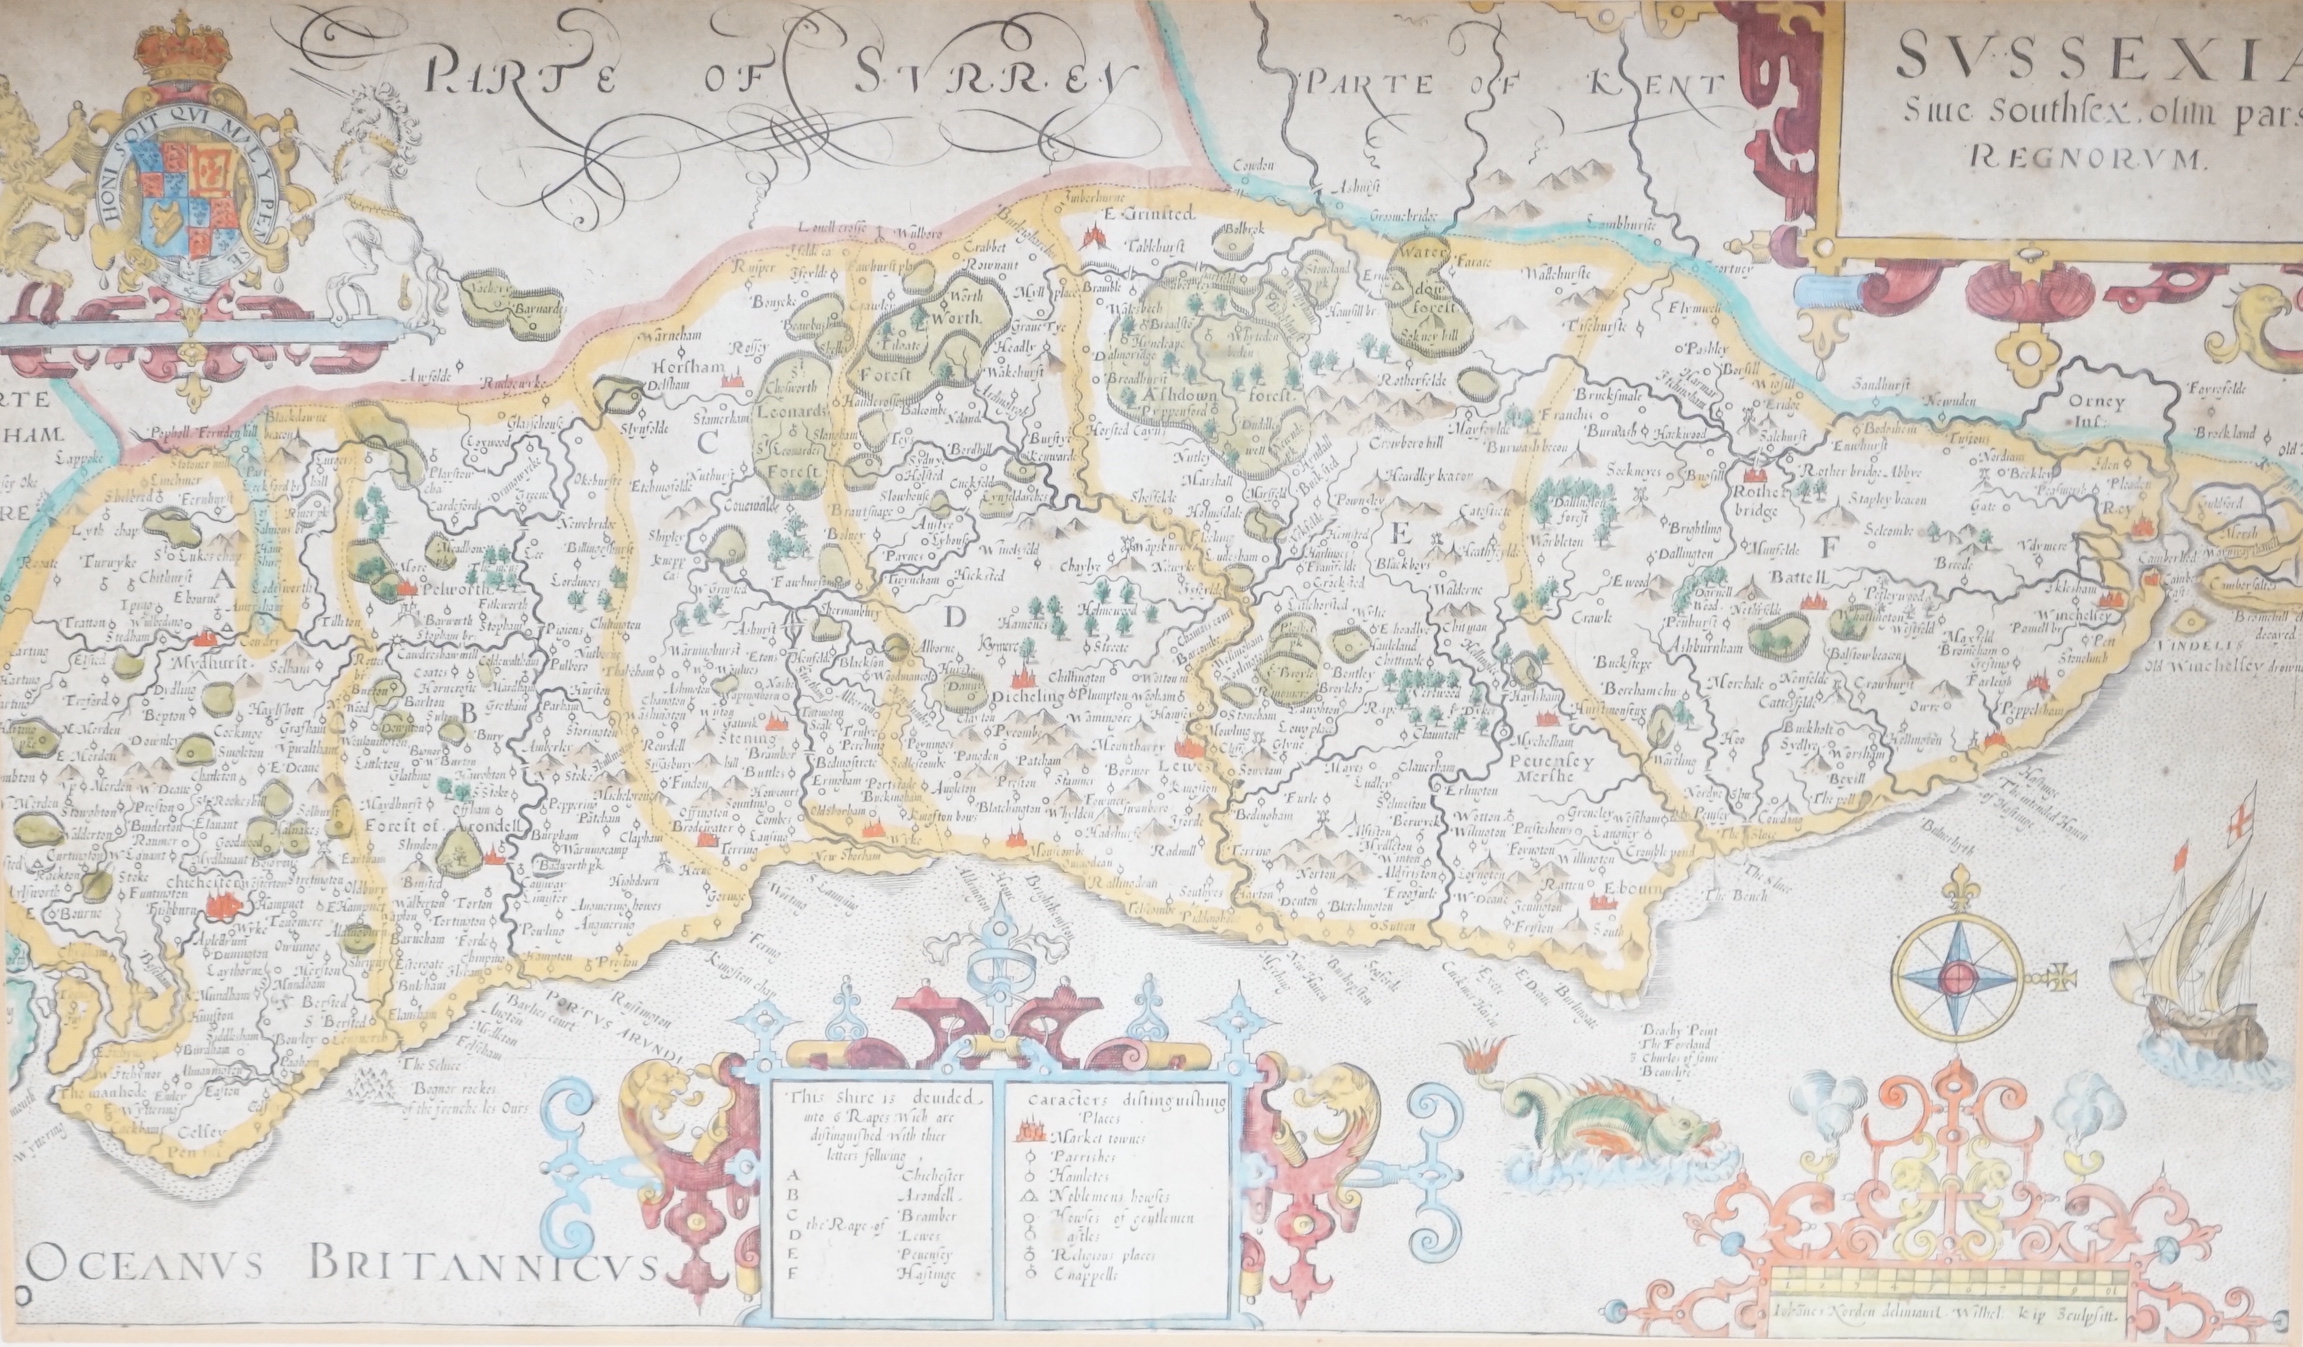 William Kip and John Norden (1546-1625), hand-coloured map, ‘Svssexia' (sic), 21 x 37cm                                                                                                                                     